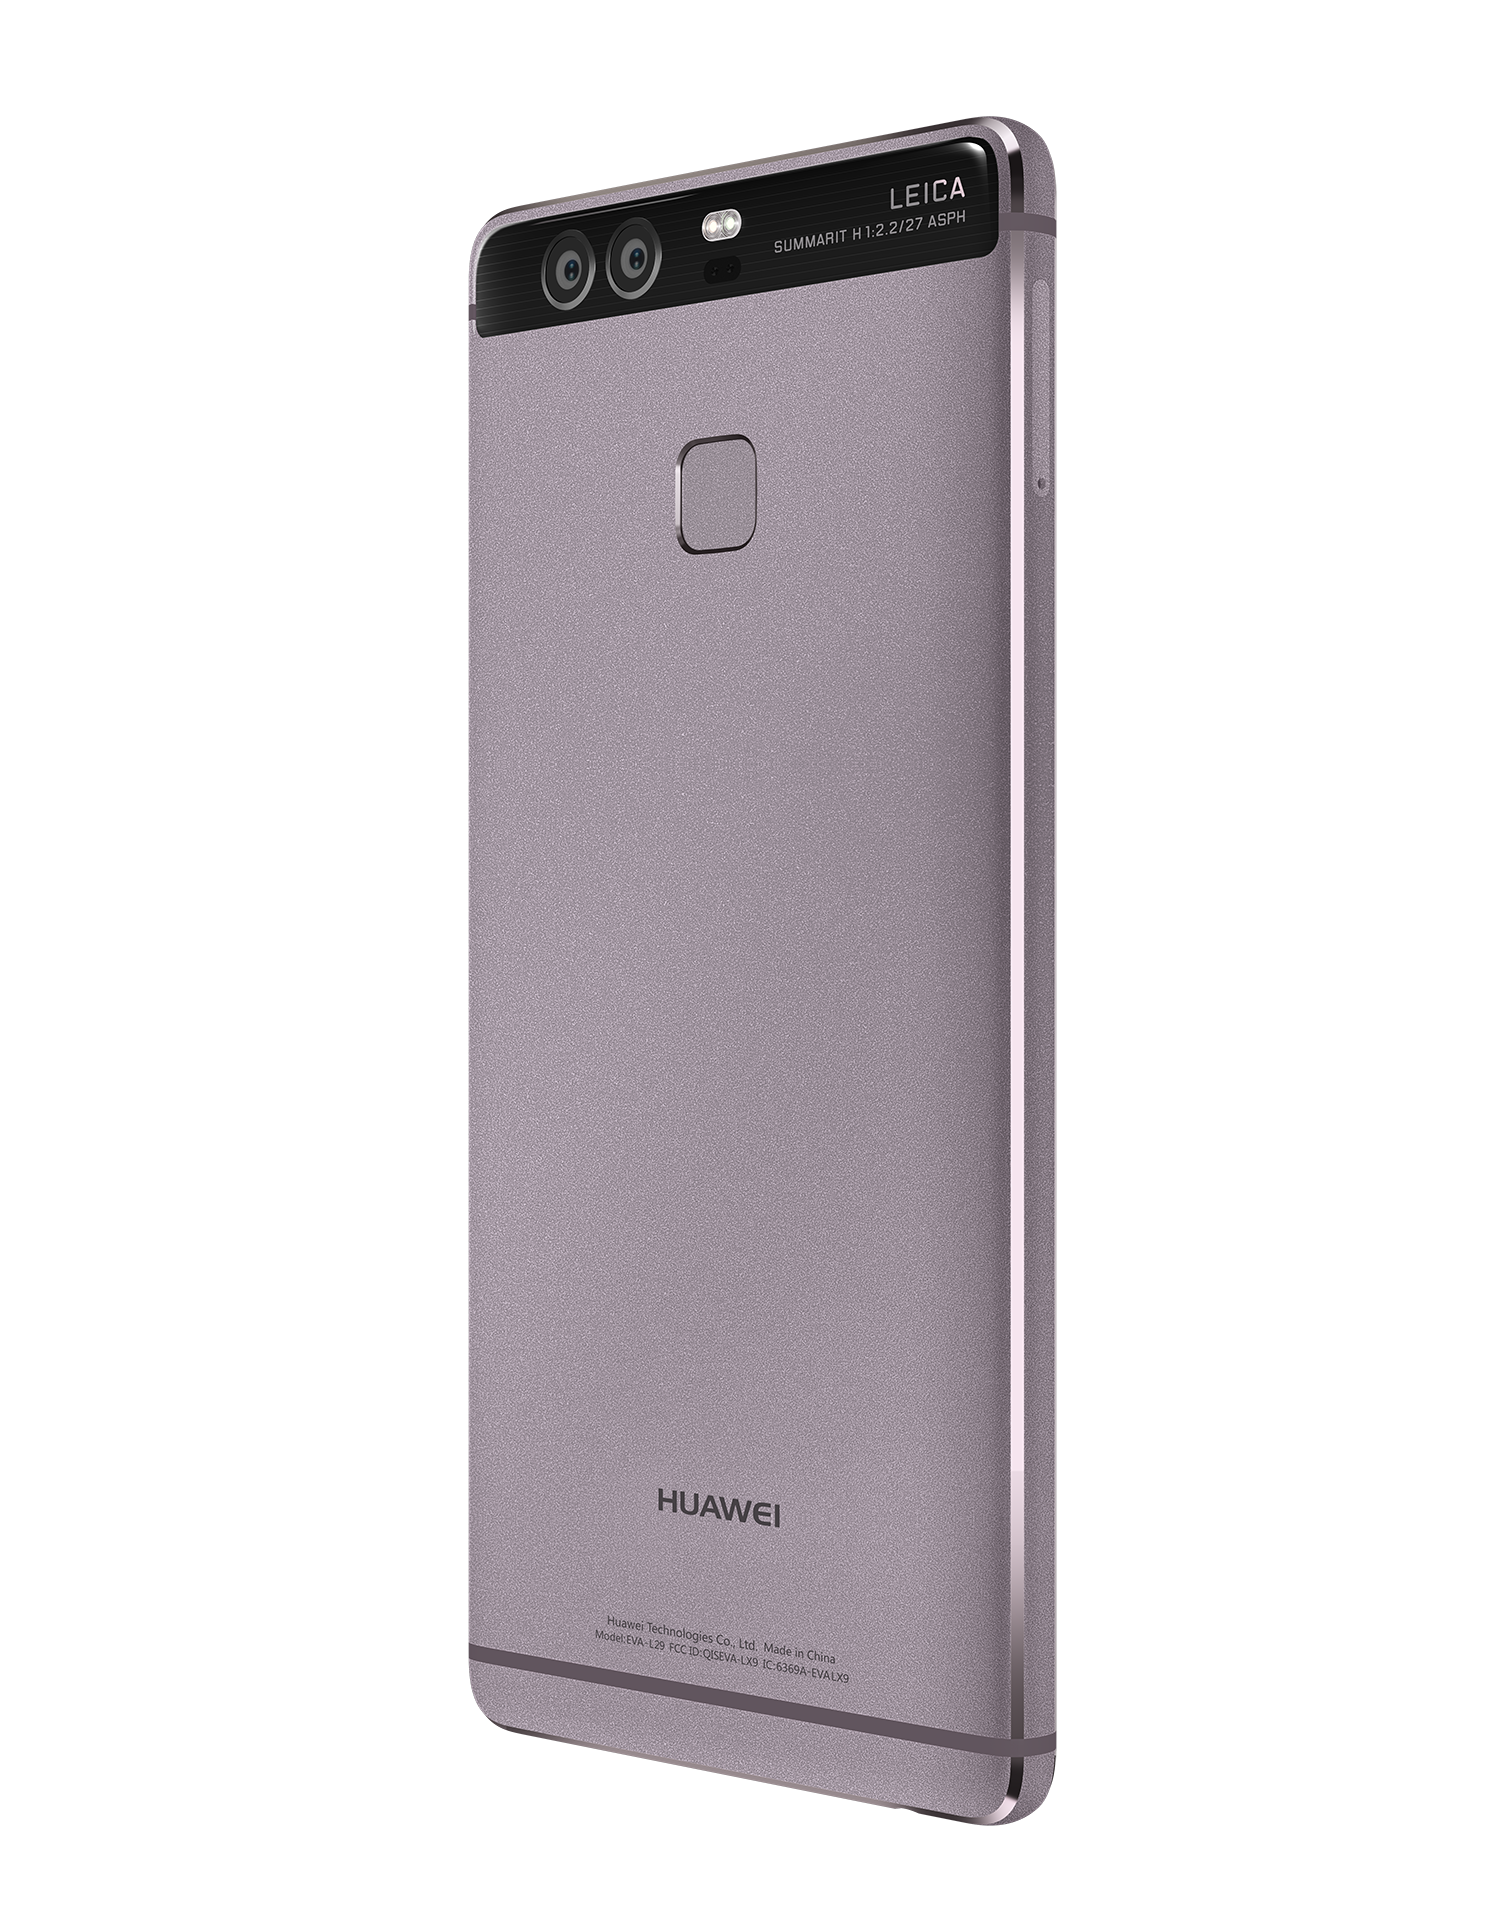 gekruld Wiens atleet The Huawei P9 And P9 Plus Are Official: 5.2-Inch And 5.5-Inch 1080p Screens  With Leica Dual Lens Cameras